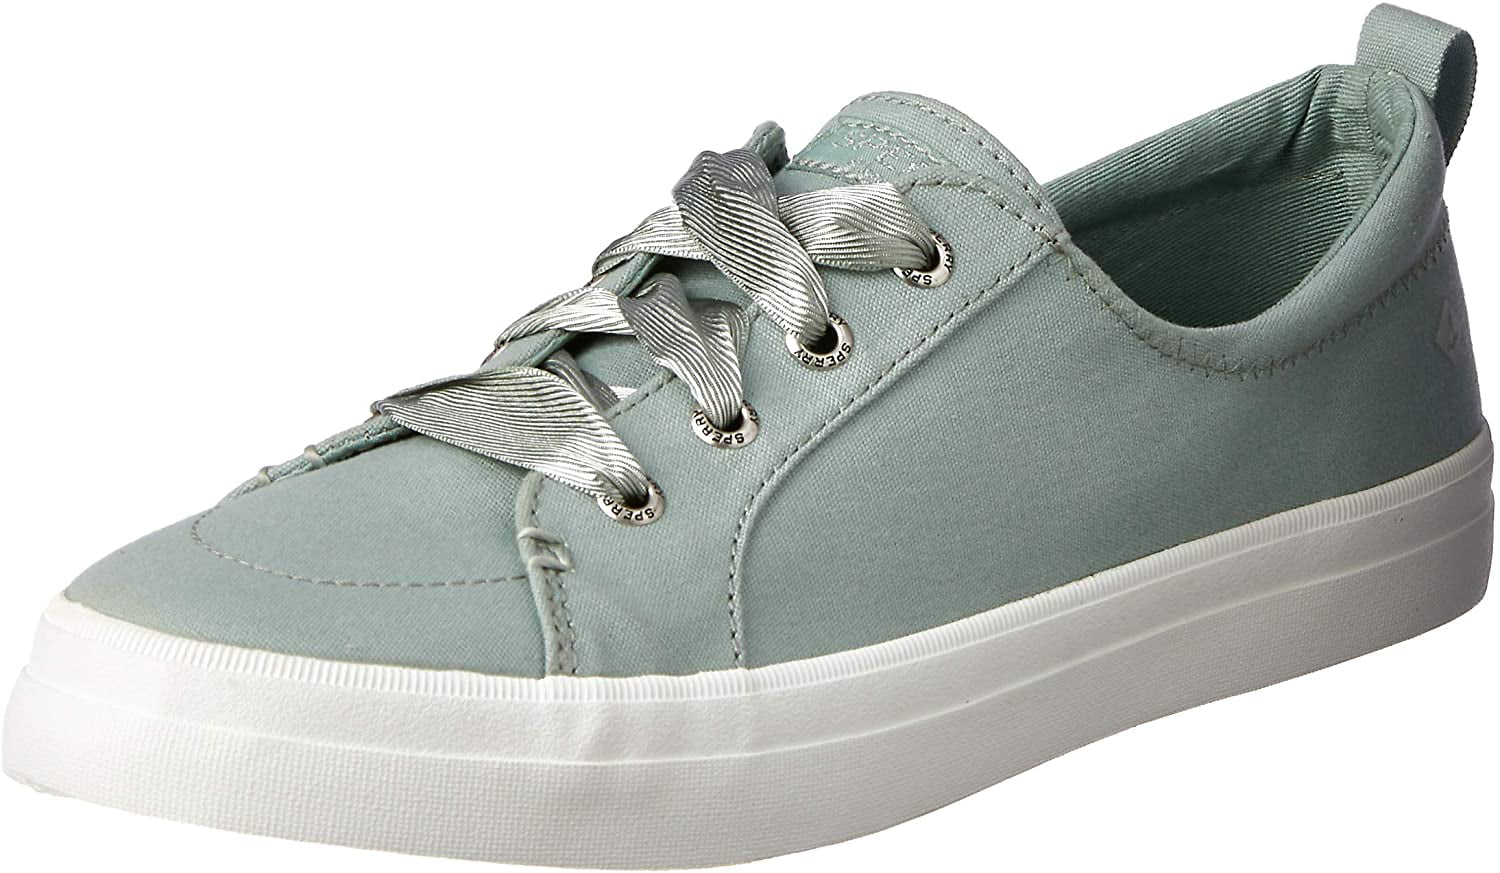 sperry crest vibe satin lace sneaker